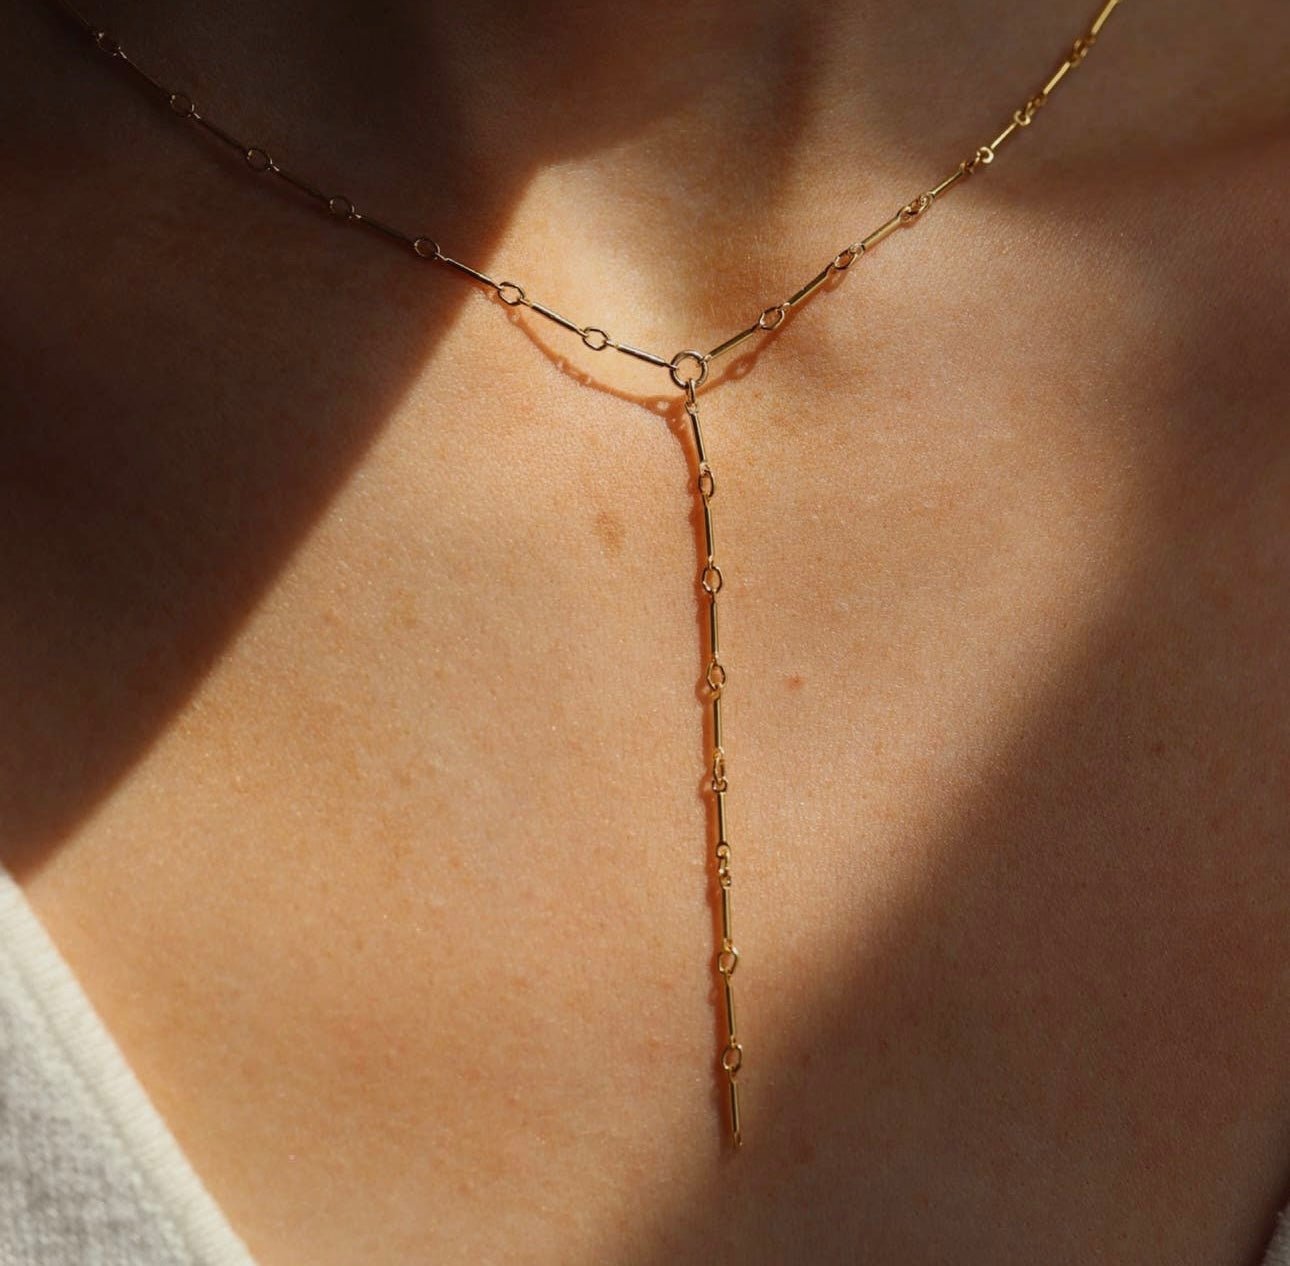 Dot and Dash Lariat Necklace | 14K Gold Fill | Hypoallergenic, Waterproof and Tarnish-Resistant - Wellaine